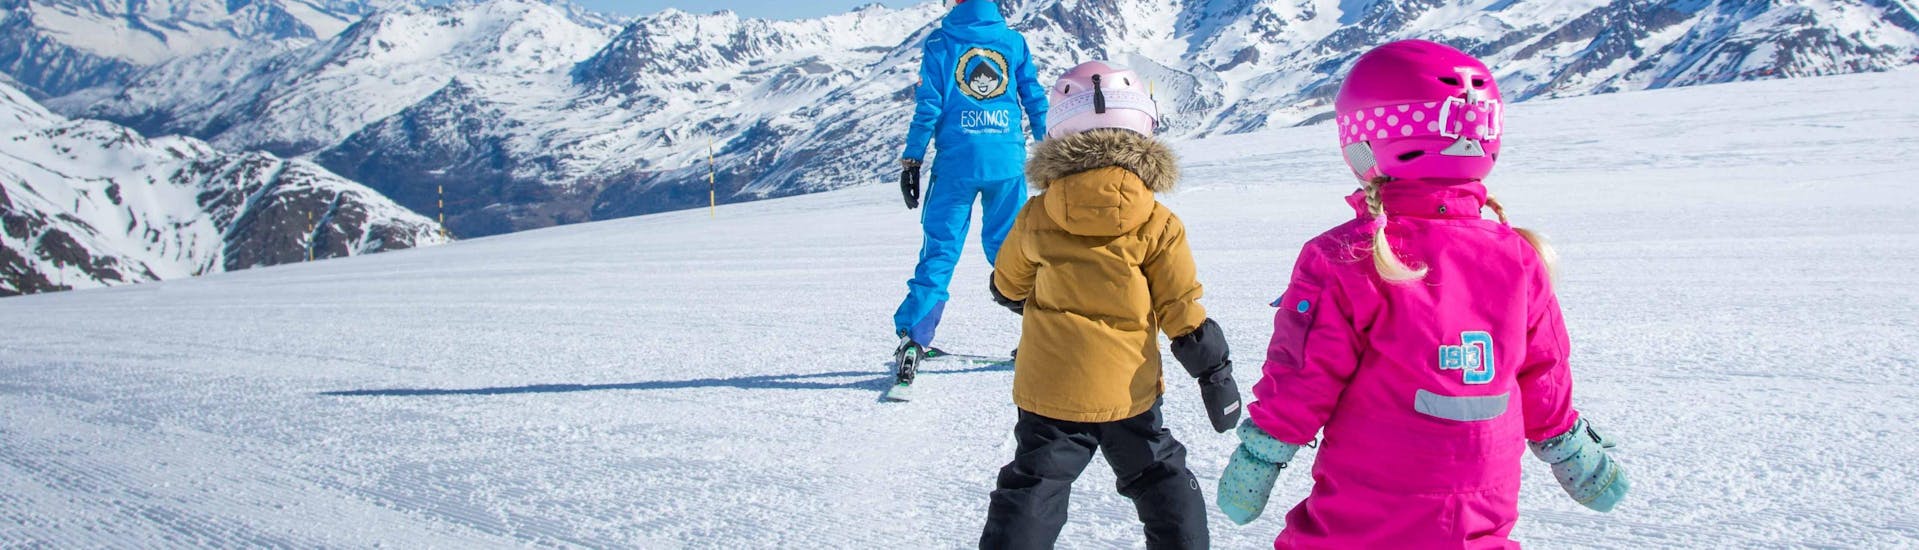 Private Ski Lessons for Kids of All Levels.